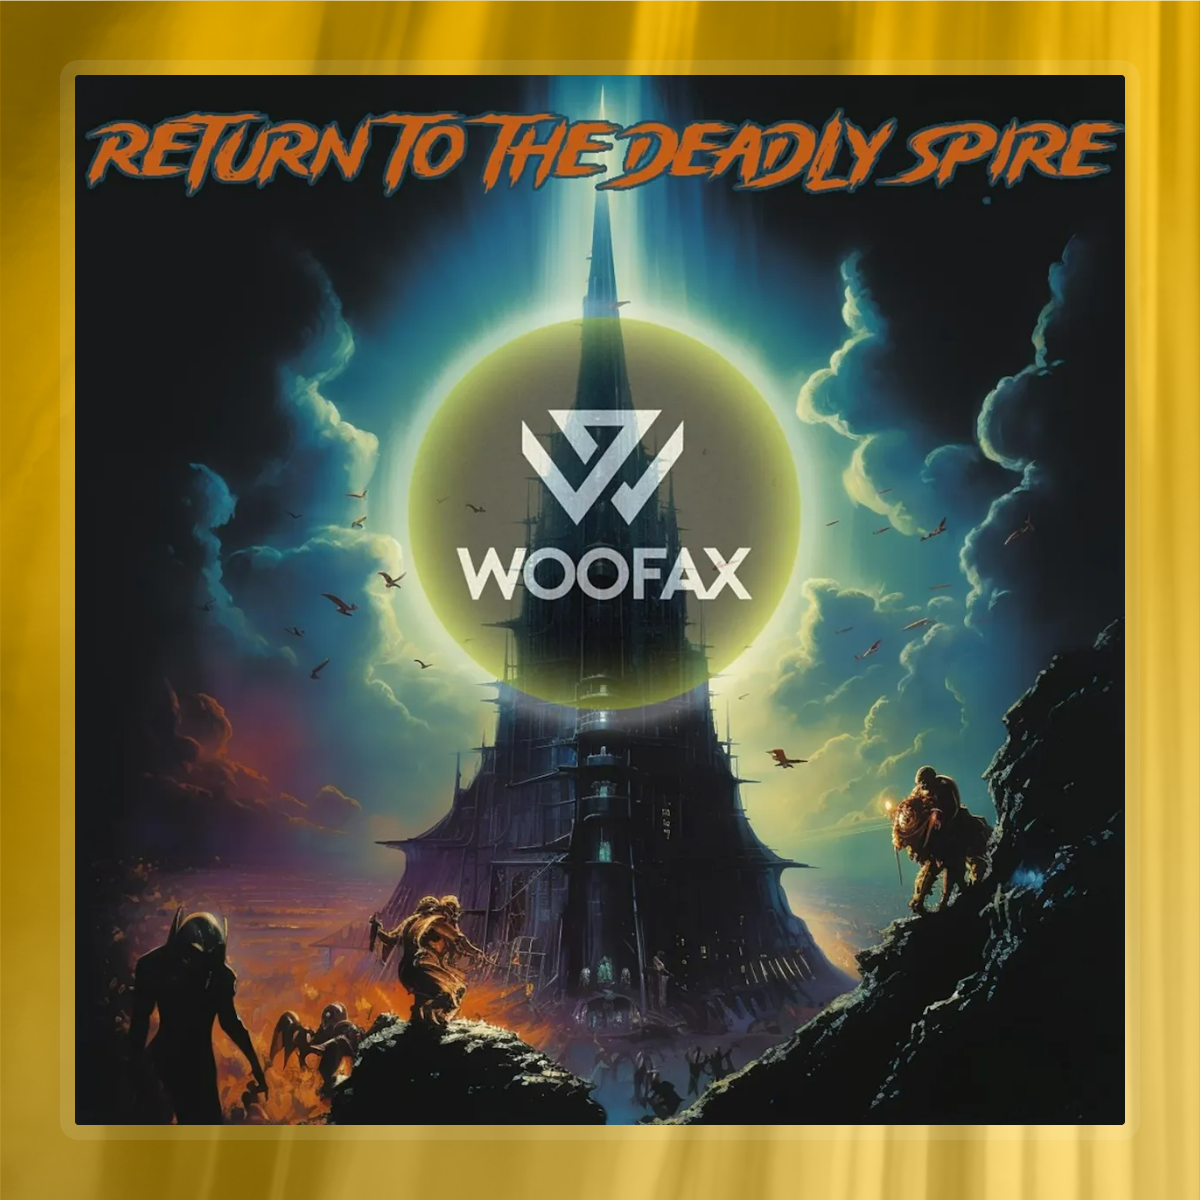 Return To The Deadly Spire